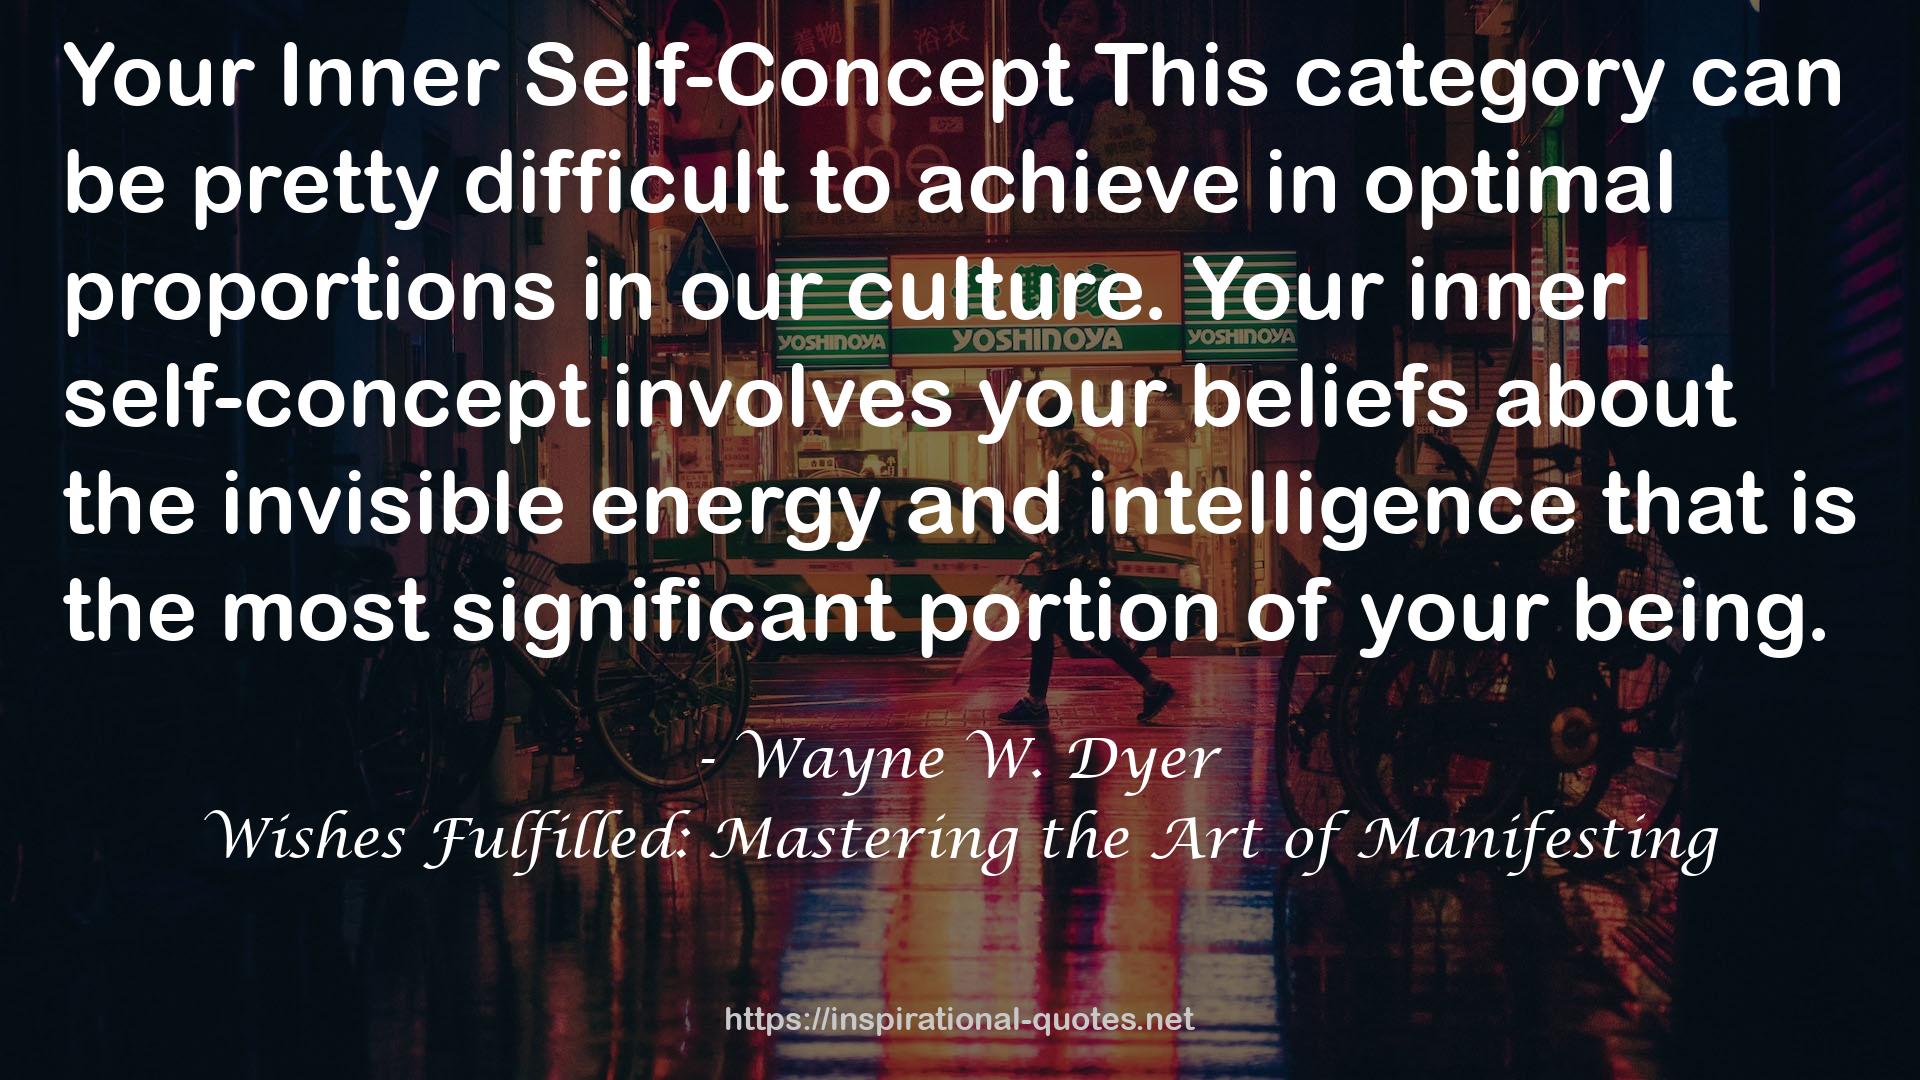 Wishes Fulfilled: Mastering the Art of Manifesting QUOTES